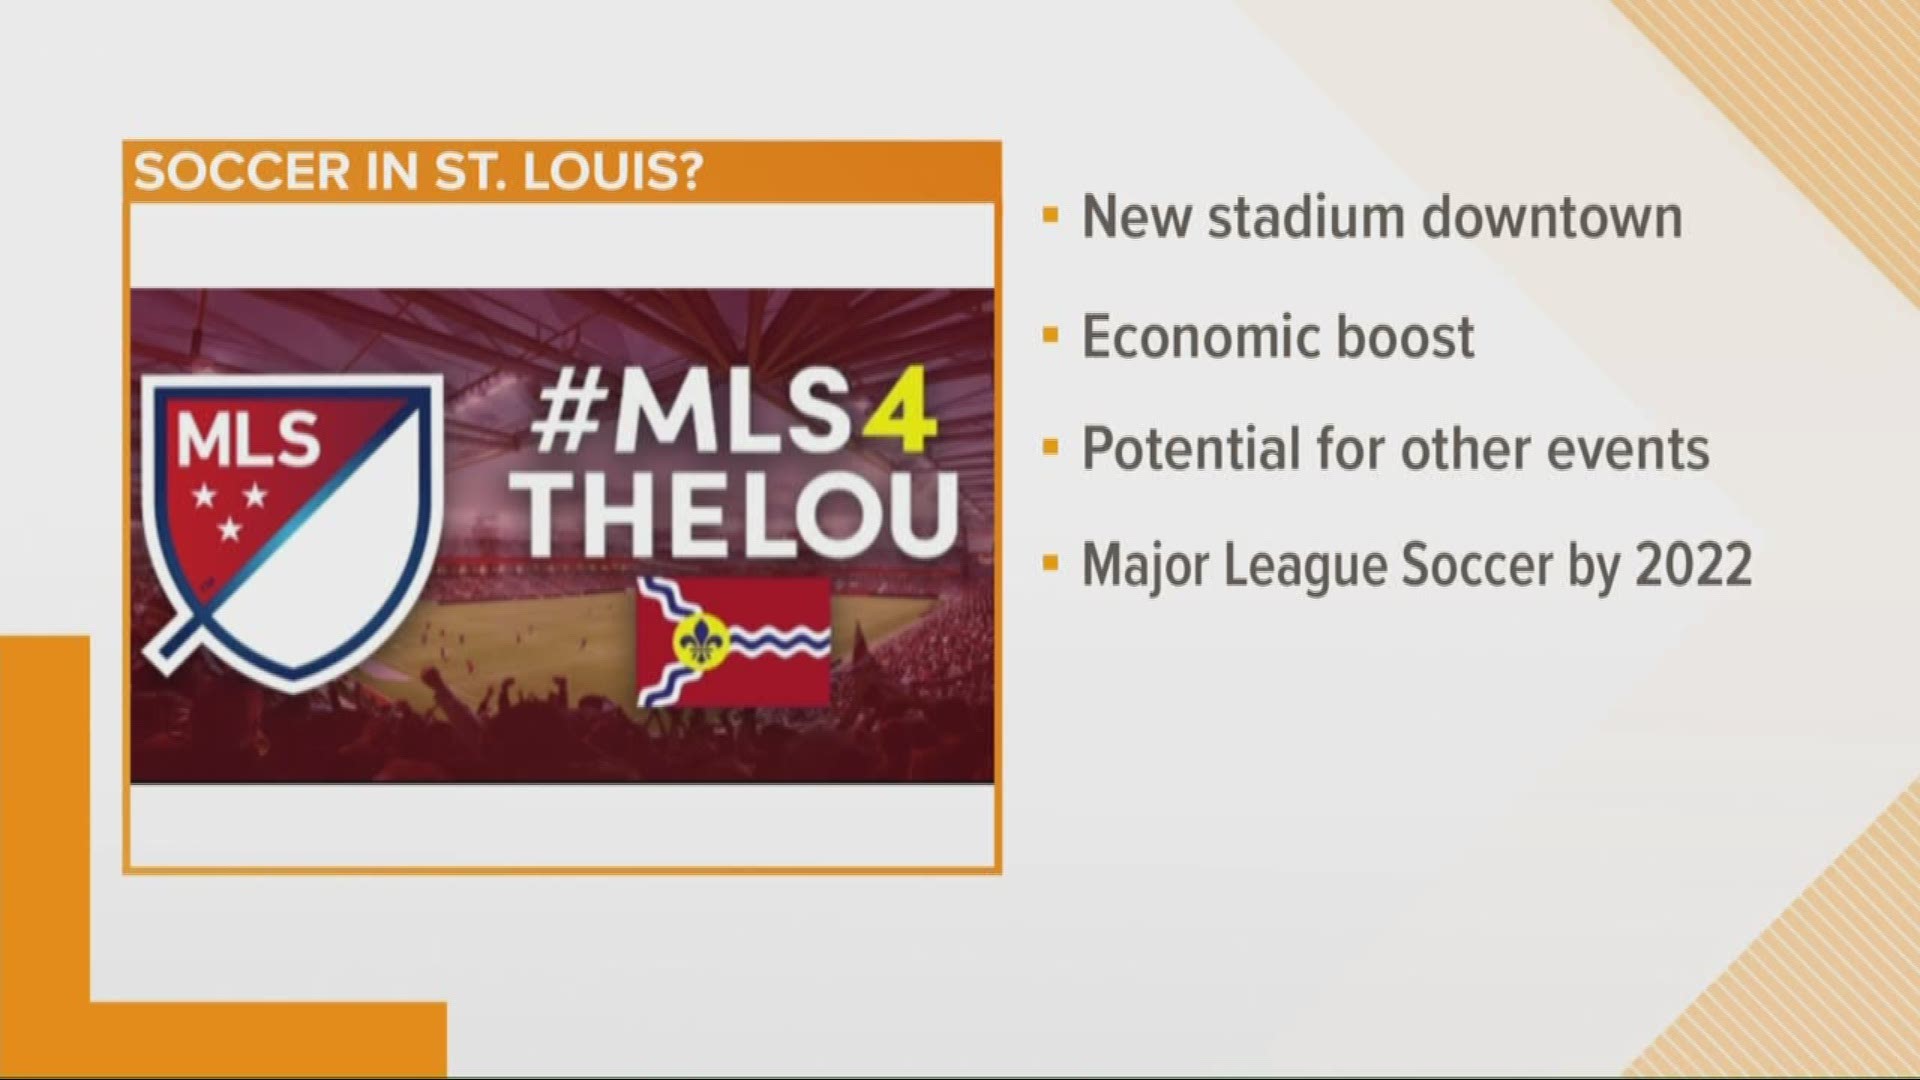 Major League Soccer is expected to announce St. Louis will be the league's 28th team.